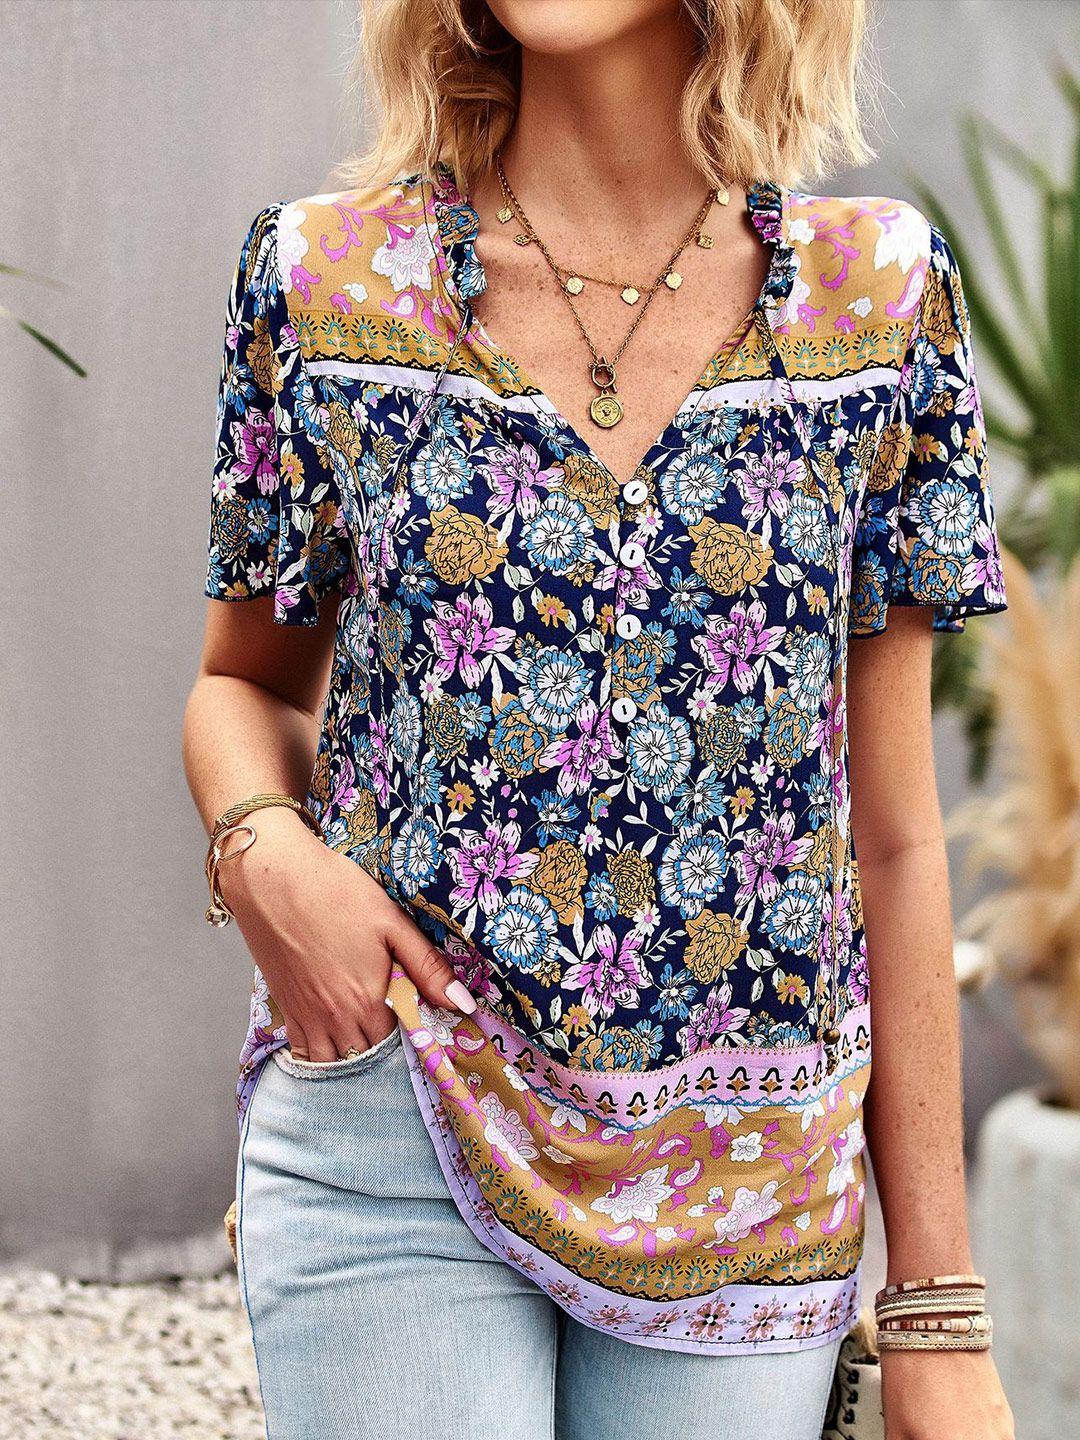 stylecast navy blue & purple floral printed flared sleeve ruffles top